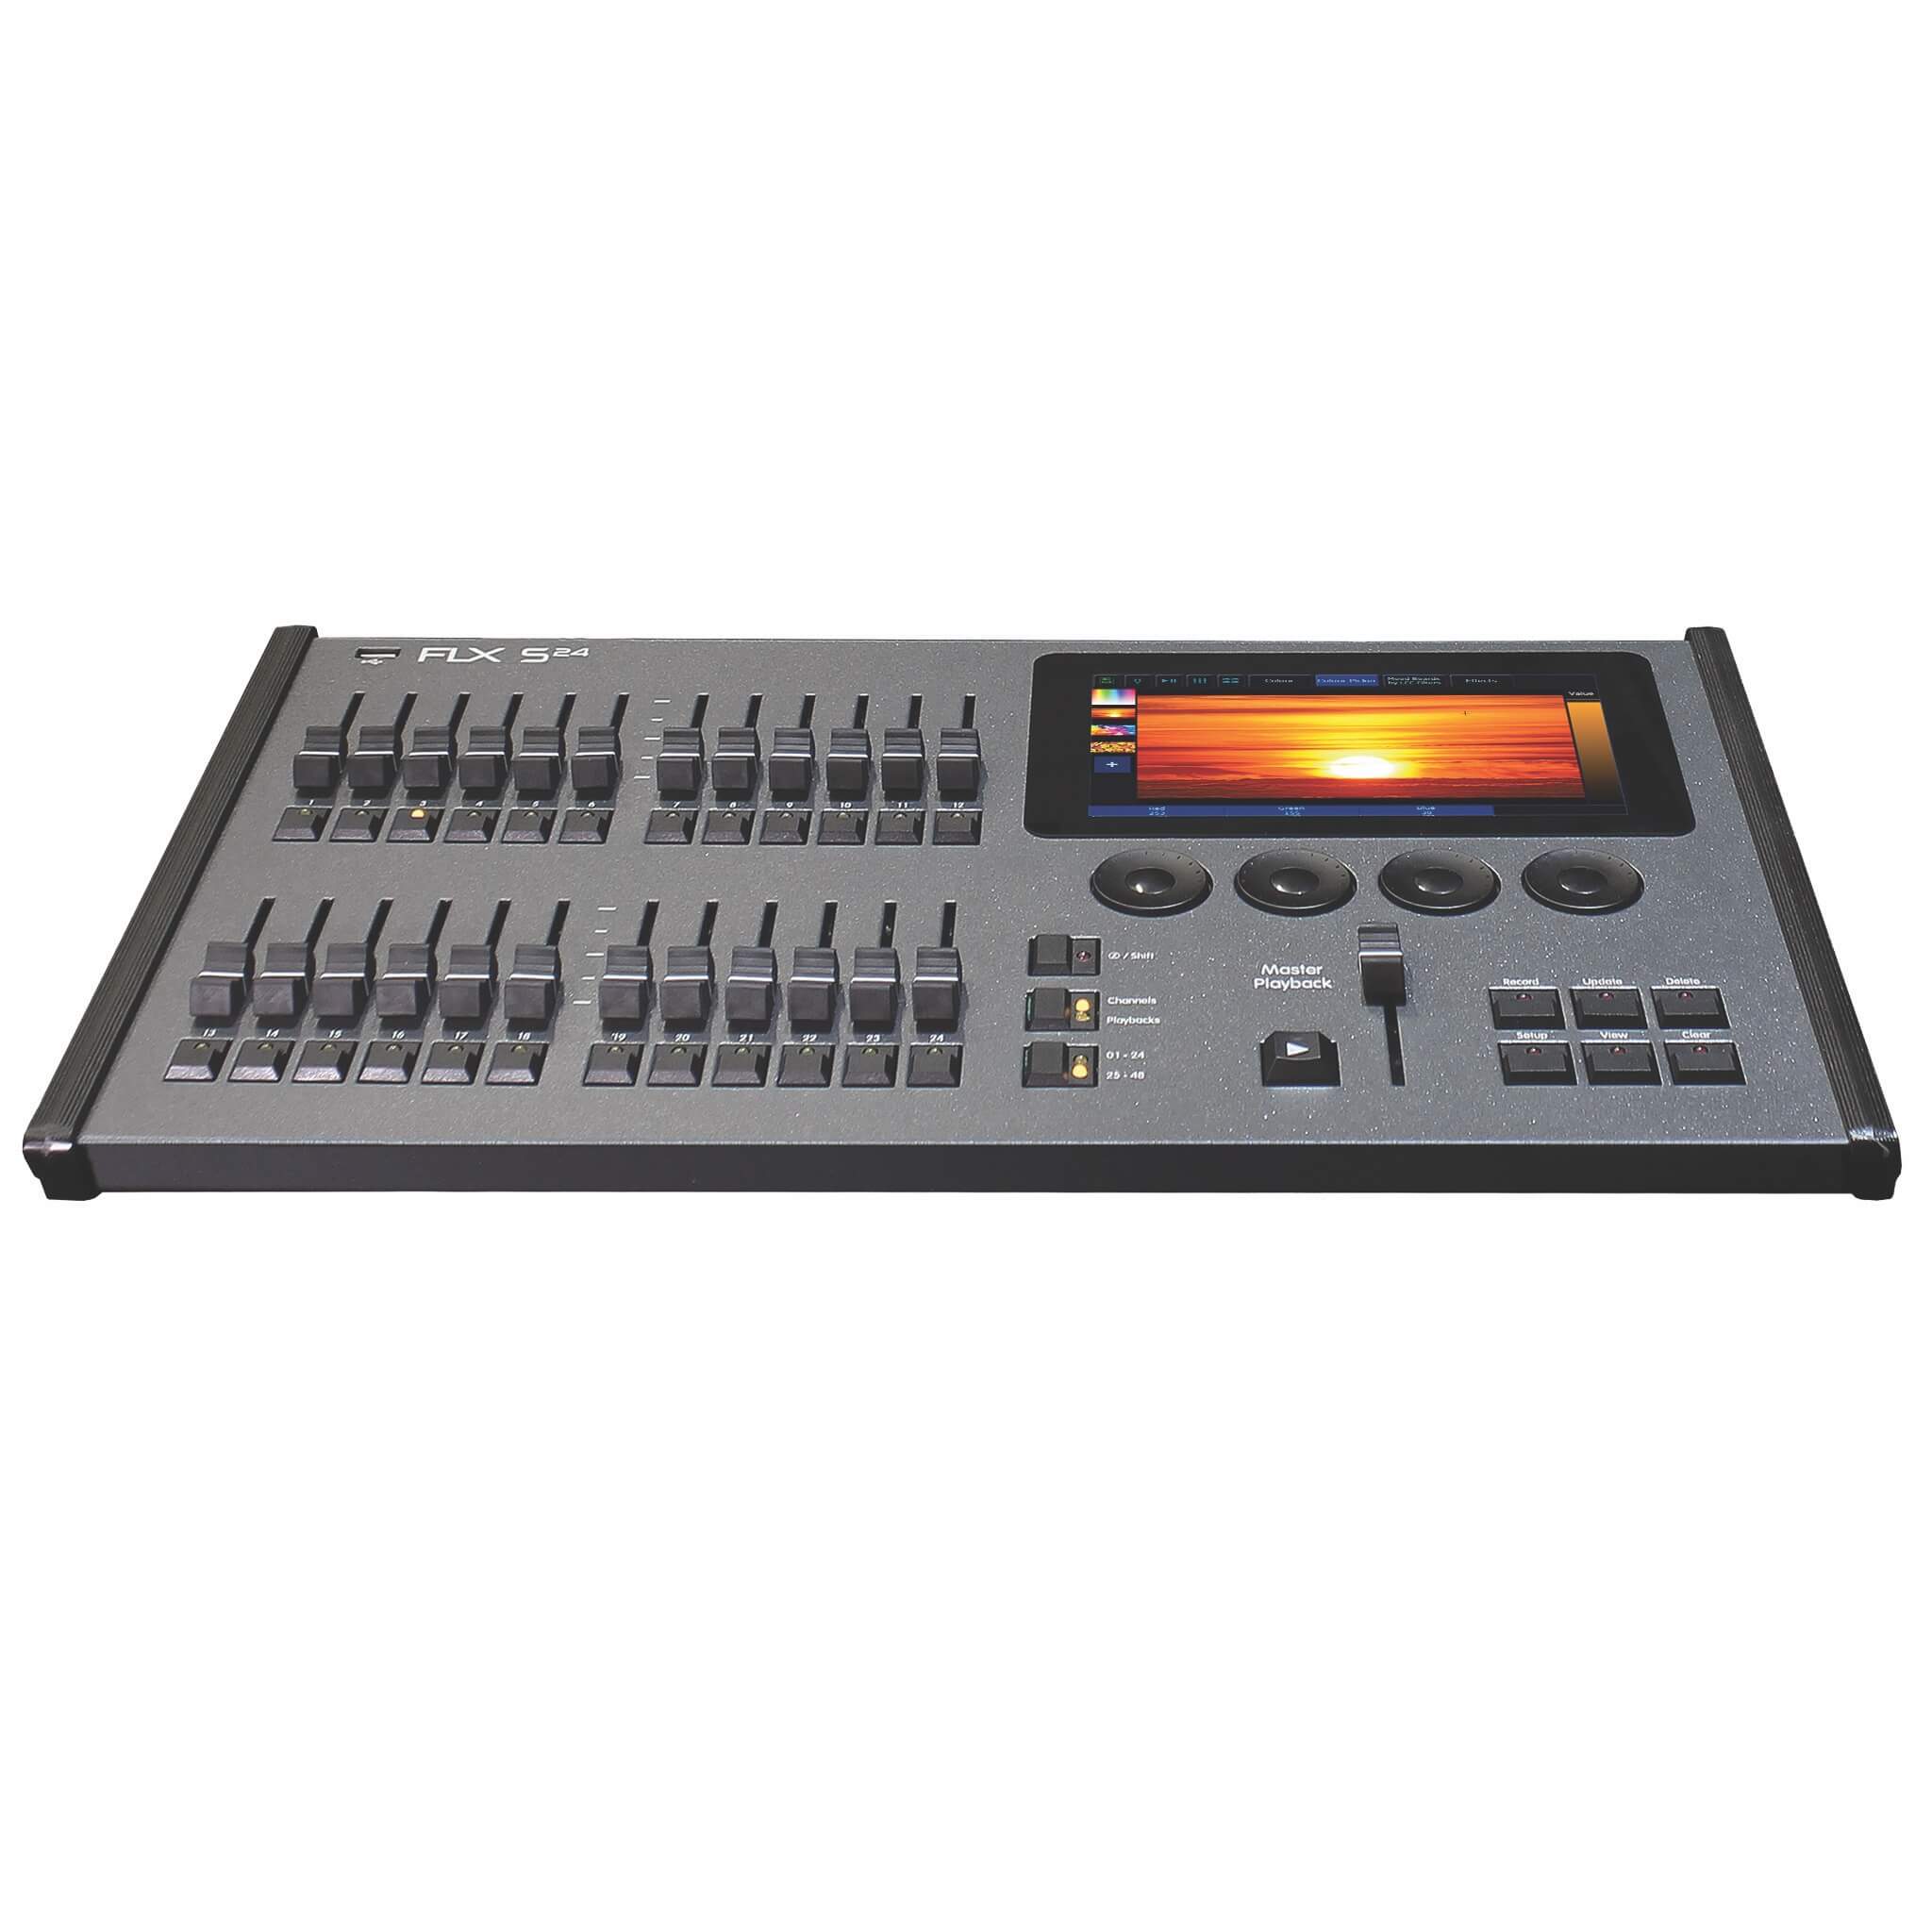 Vari-Lite FLX S24 Console - 24 Fader Lighting Control Surface, front